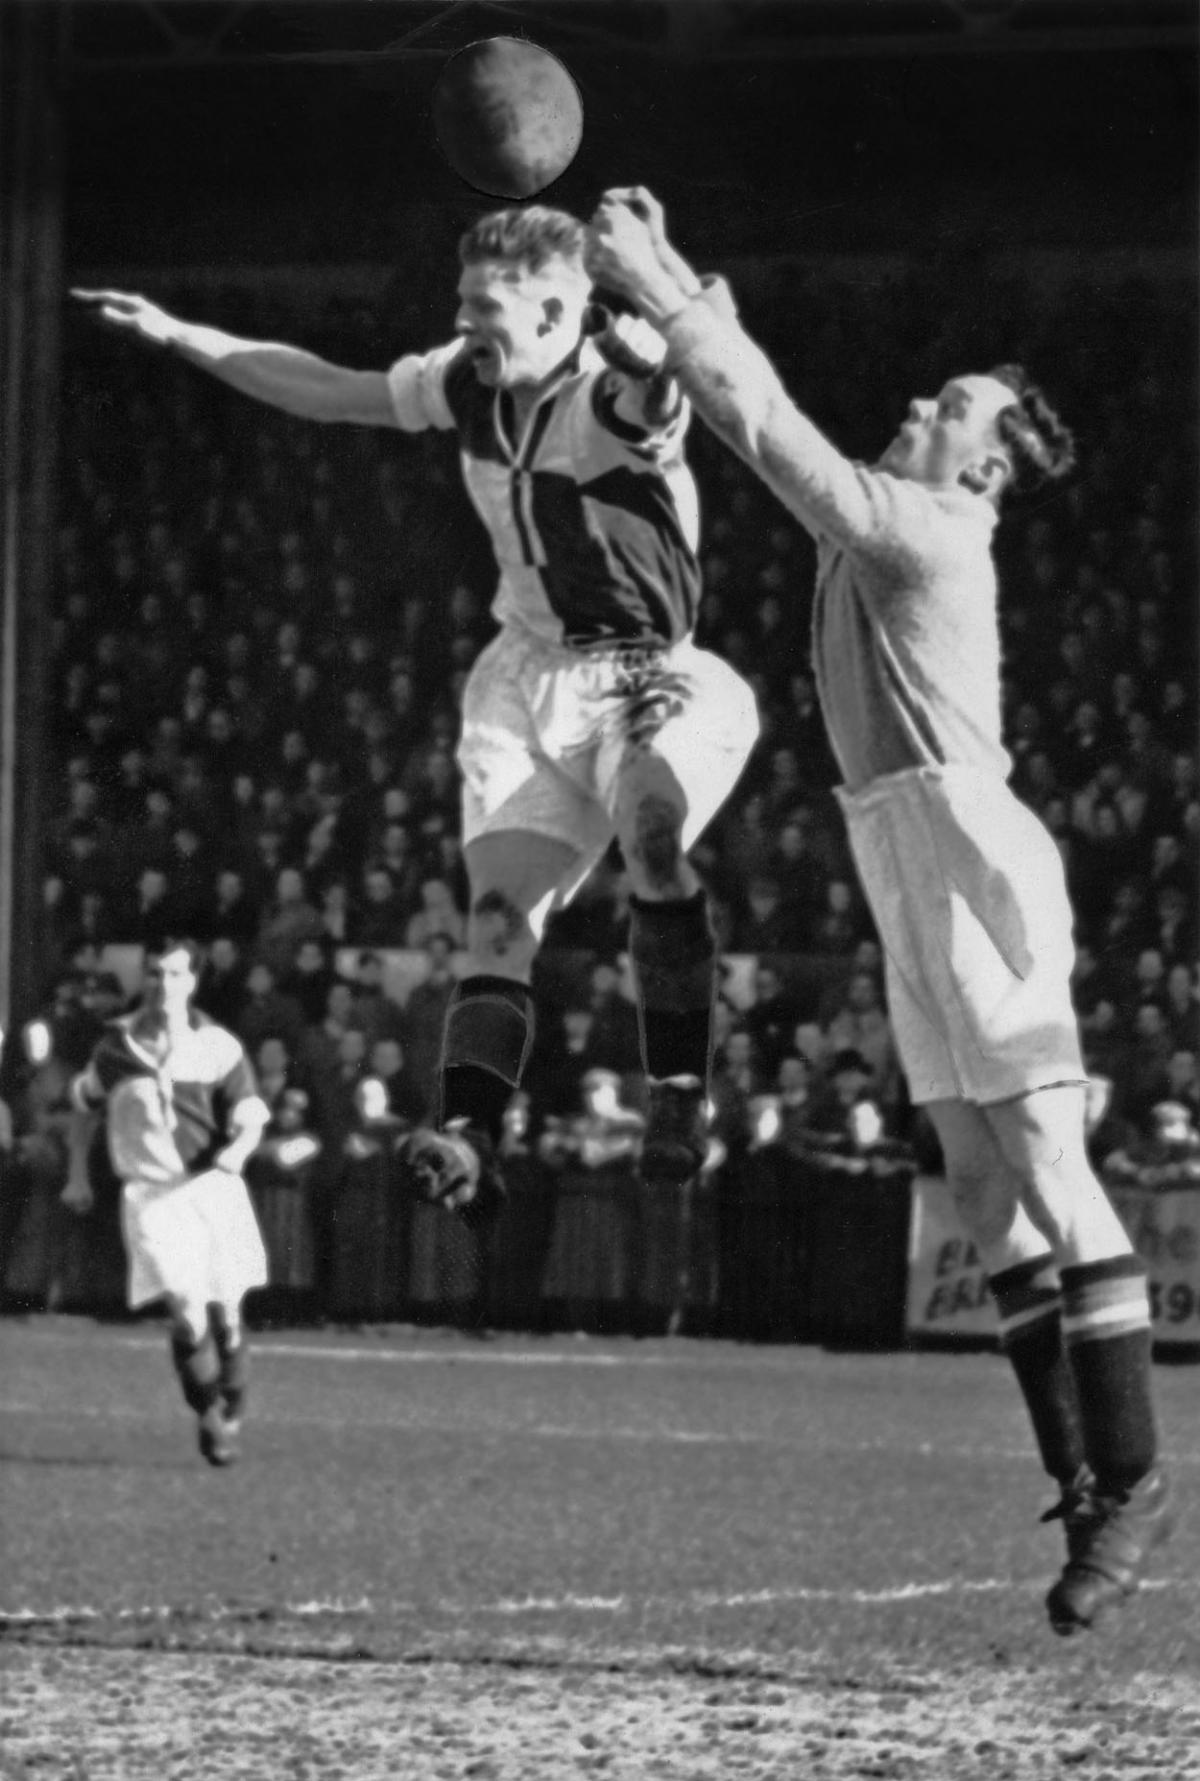 John Meadows, Boscombe's goalkeeper, making a double-fisted clearance over the head of Roost, Bristol Rovers' inside-left. 14 Mar 1951.
A selection of the images that are featured in the Daily Echo, AFC Bournemouth Photographic Book.